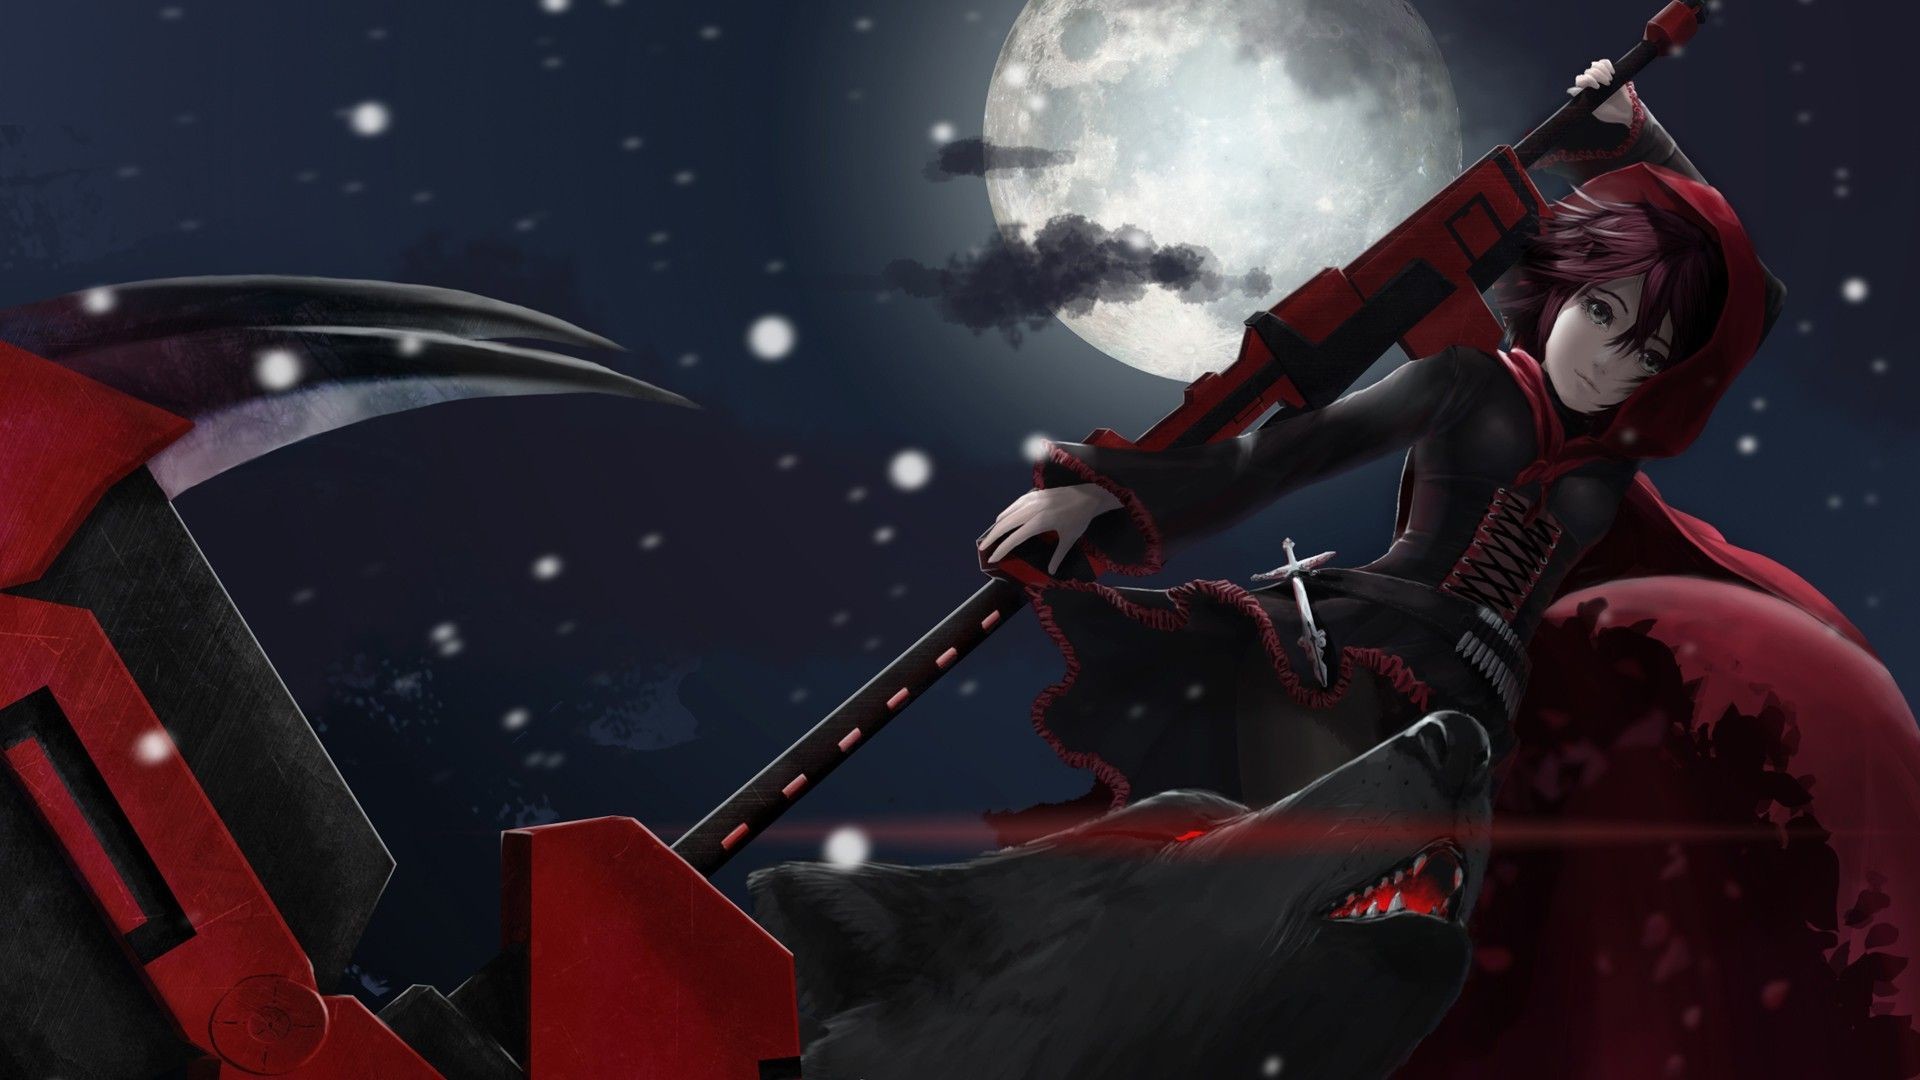 1920x1080 Ruby Rose RWBY wallpapers (24 Wallpapers)